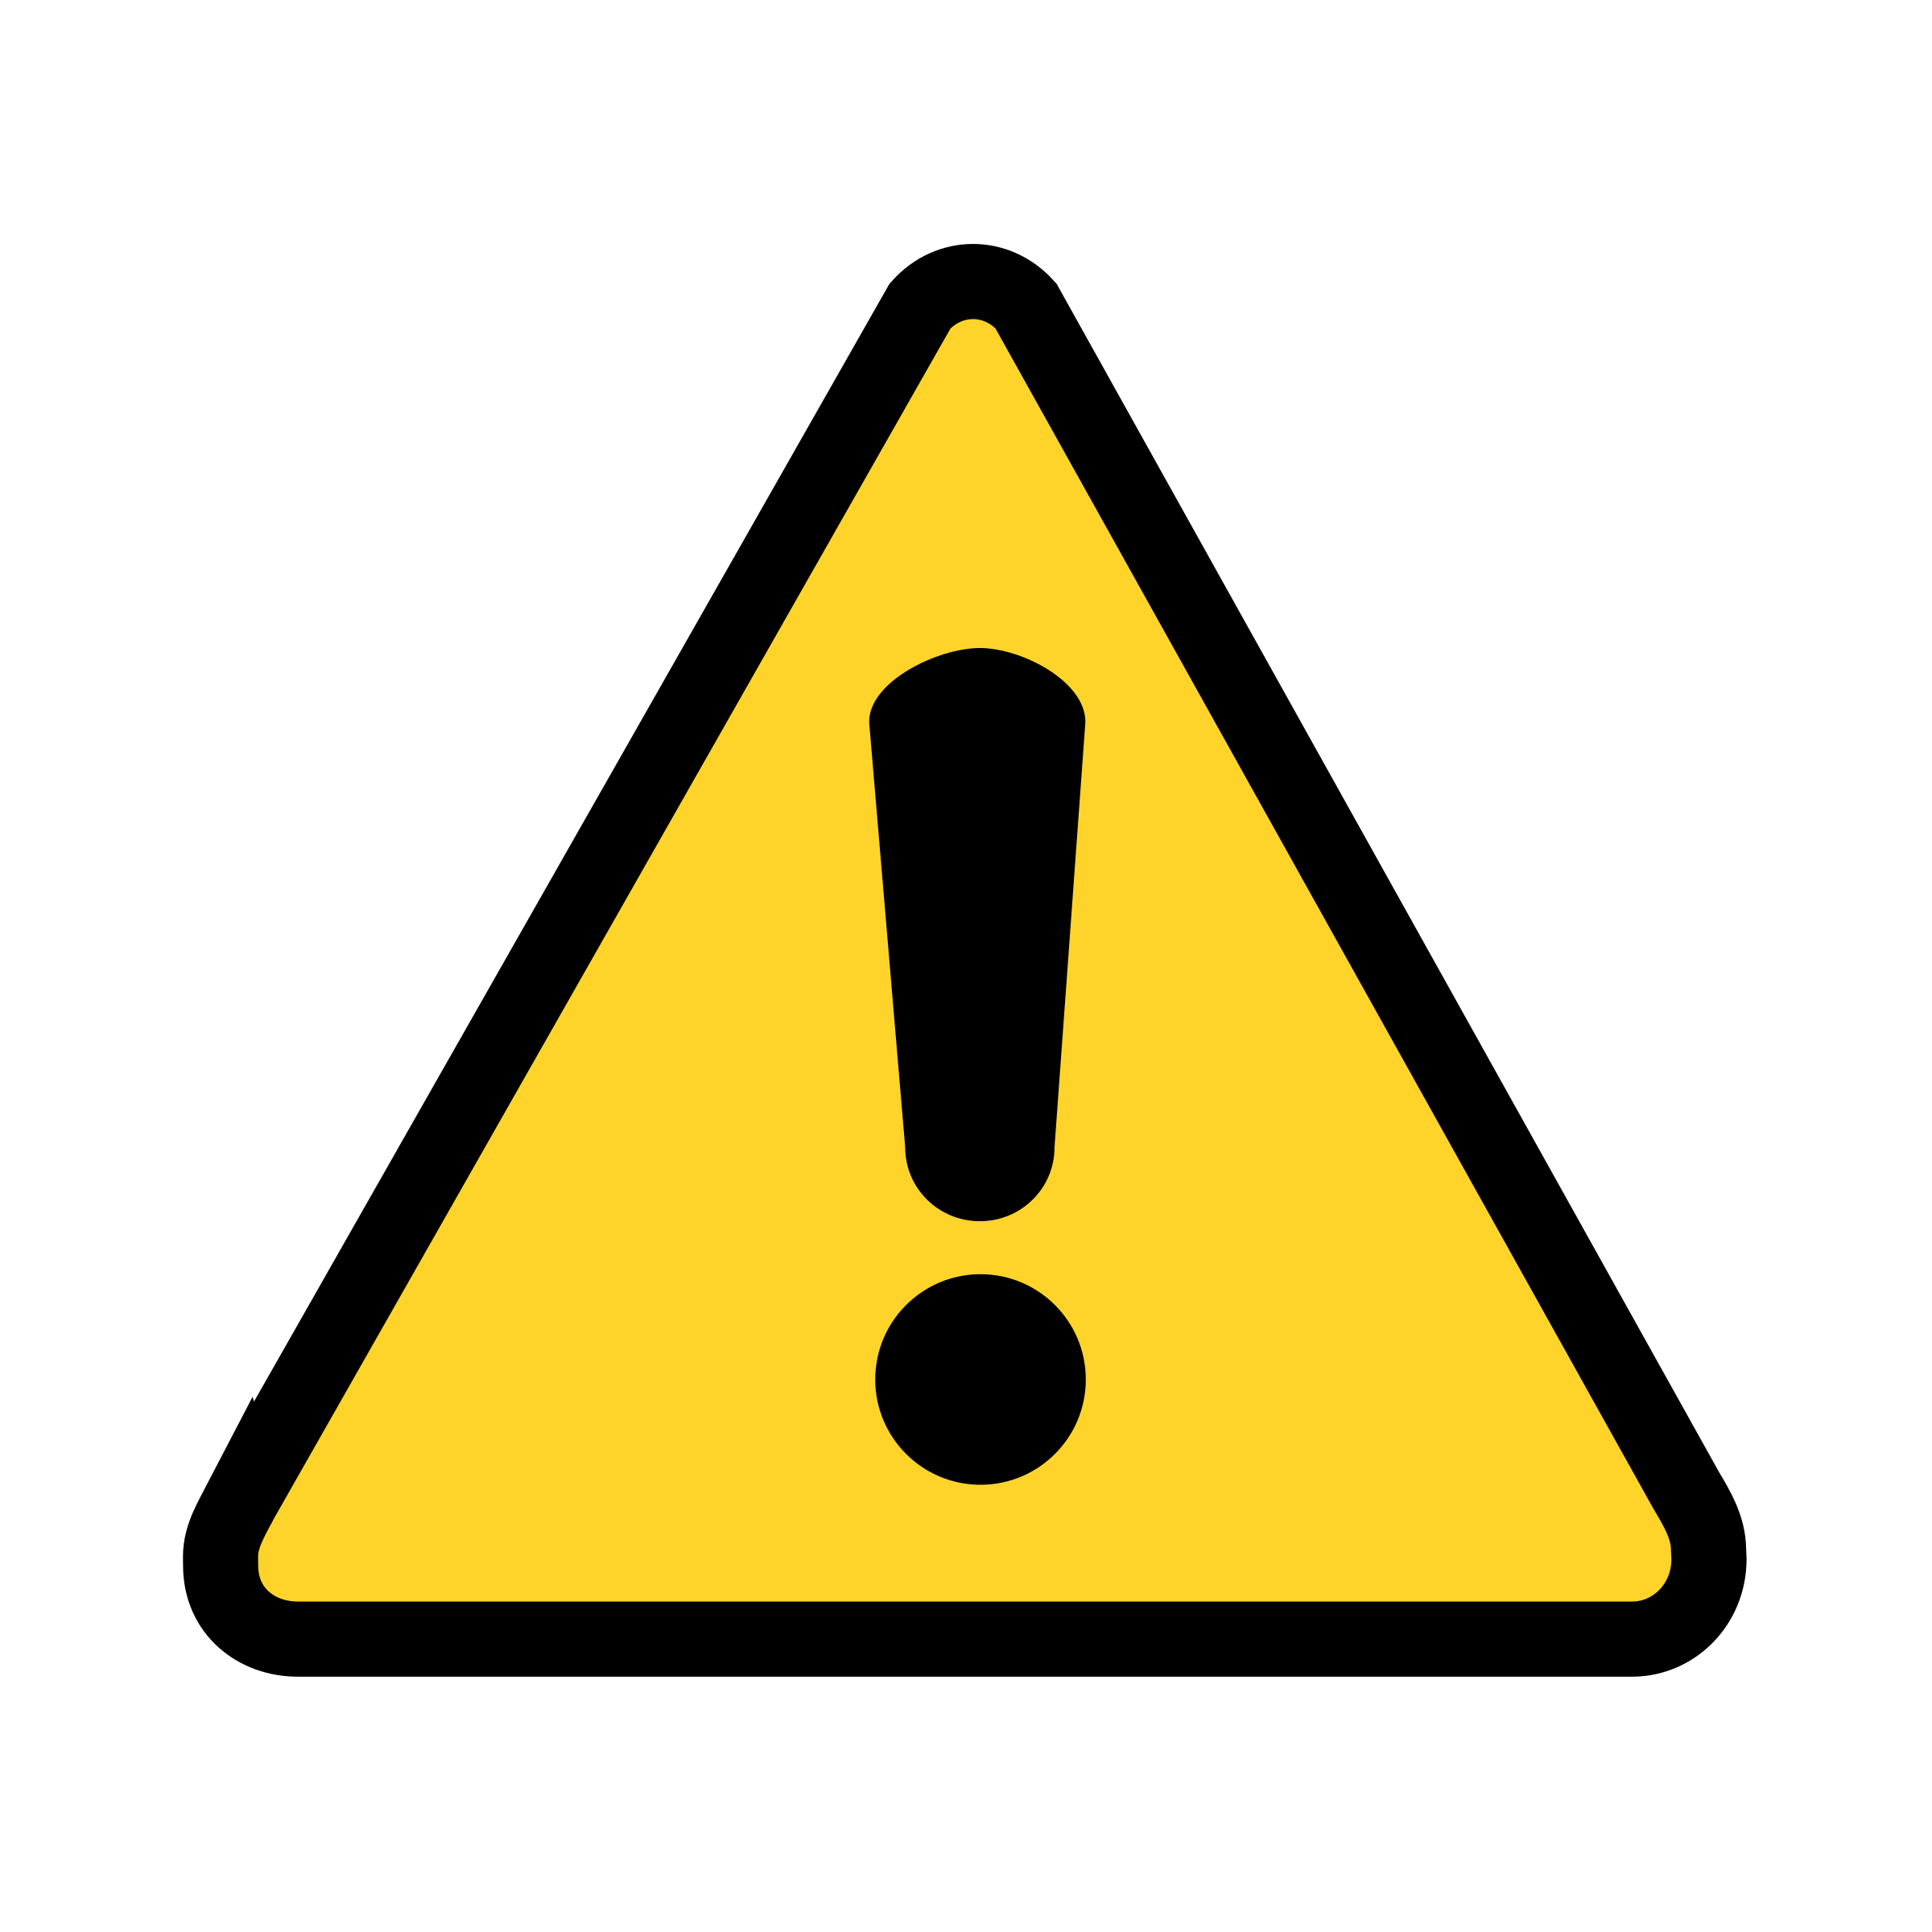 attention, sign, warning icon